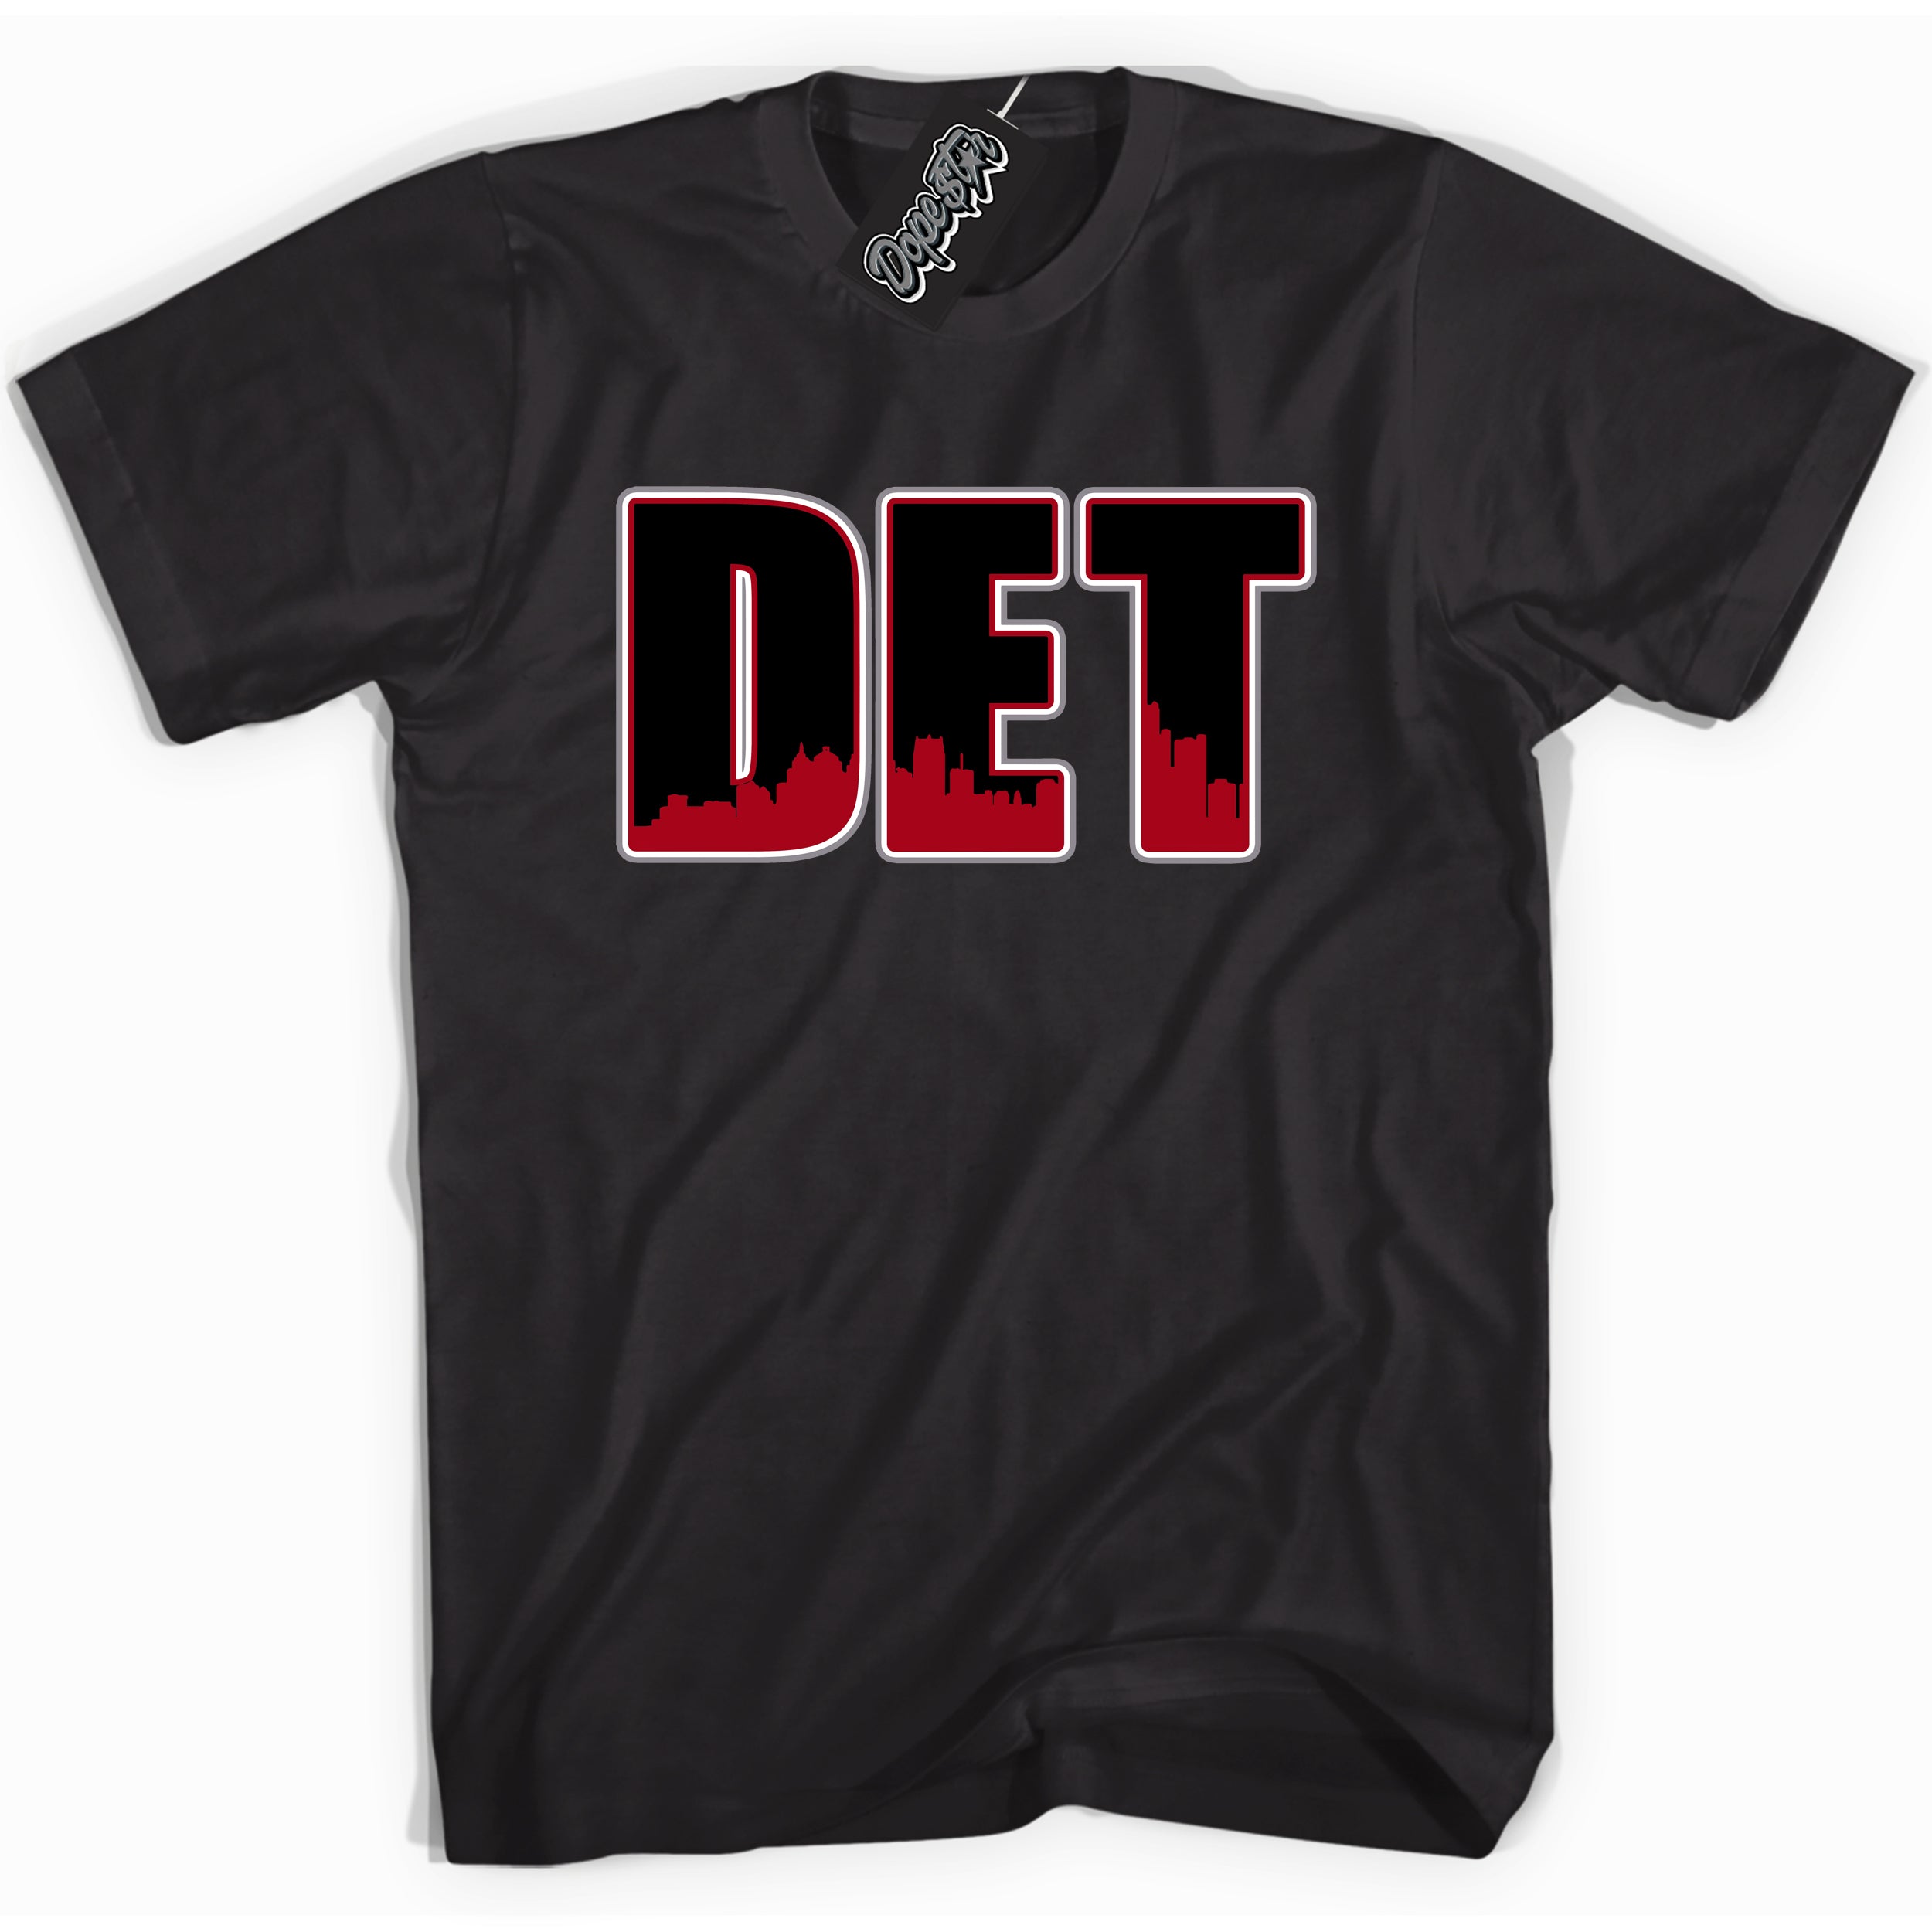 Cool Black Shirt with “ Detroit” design that perfectly matches Bred Reimagined 4s Jordans.